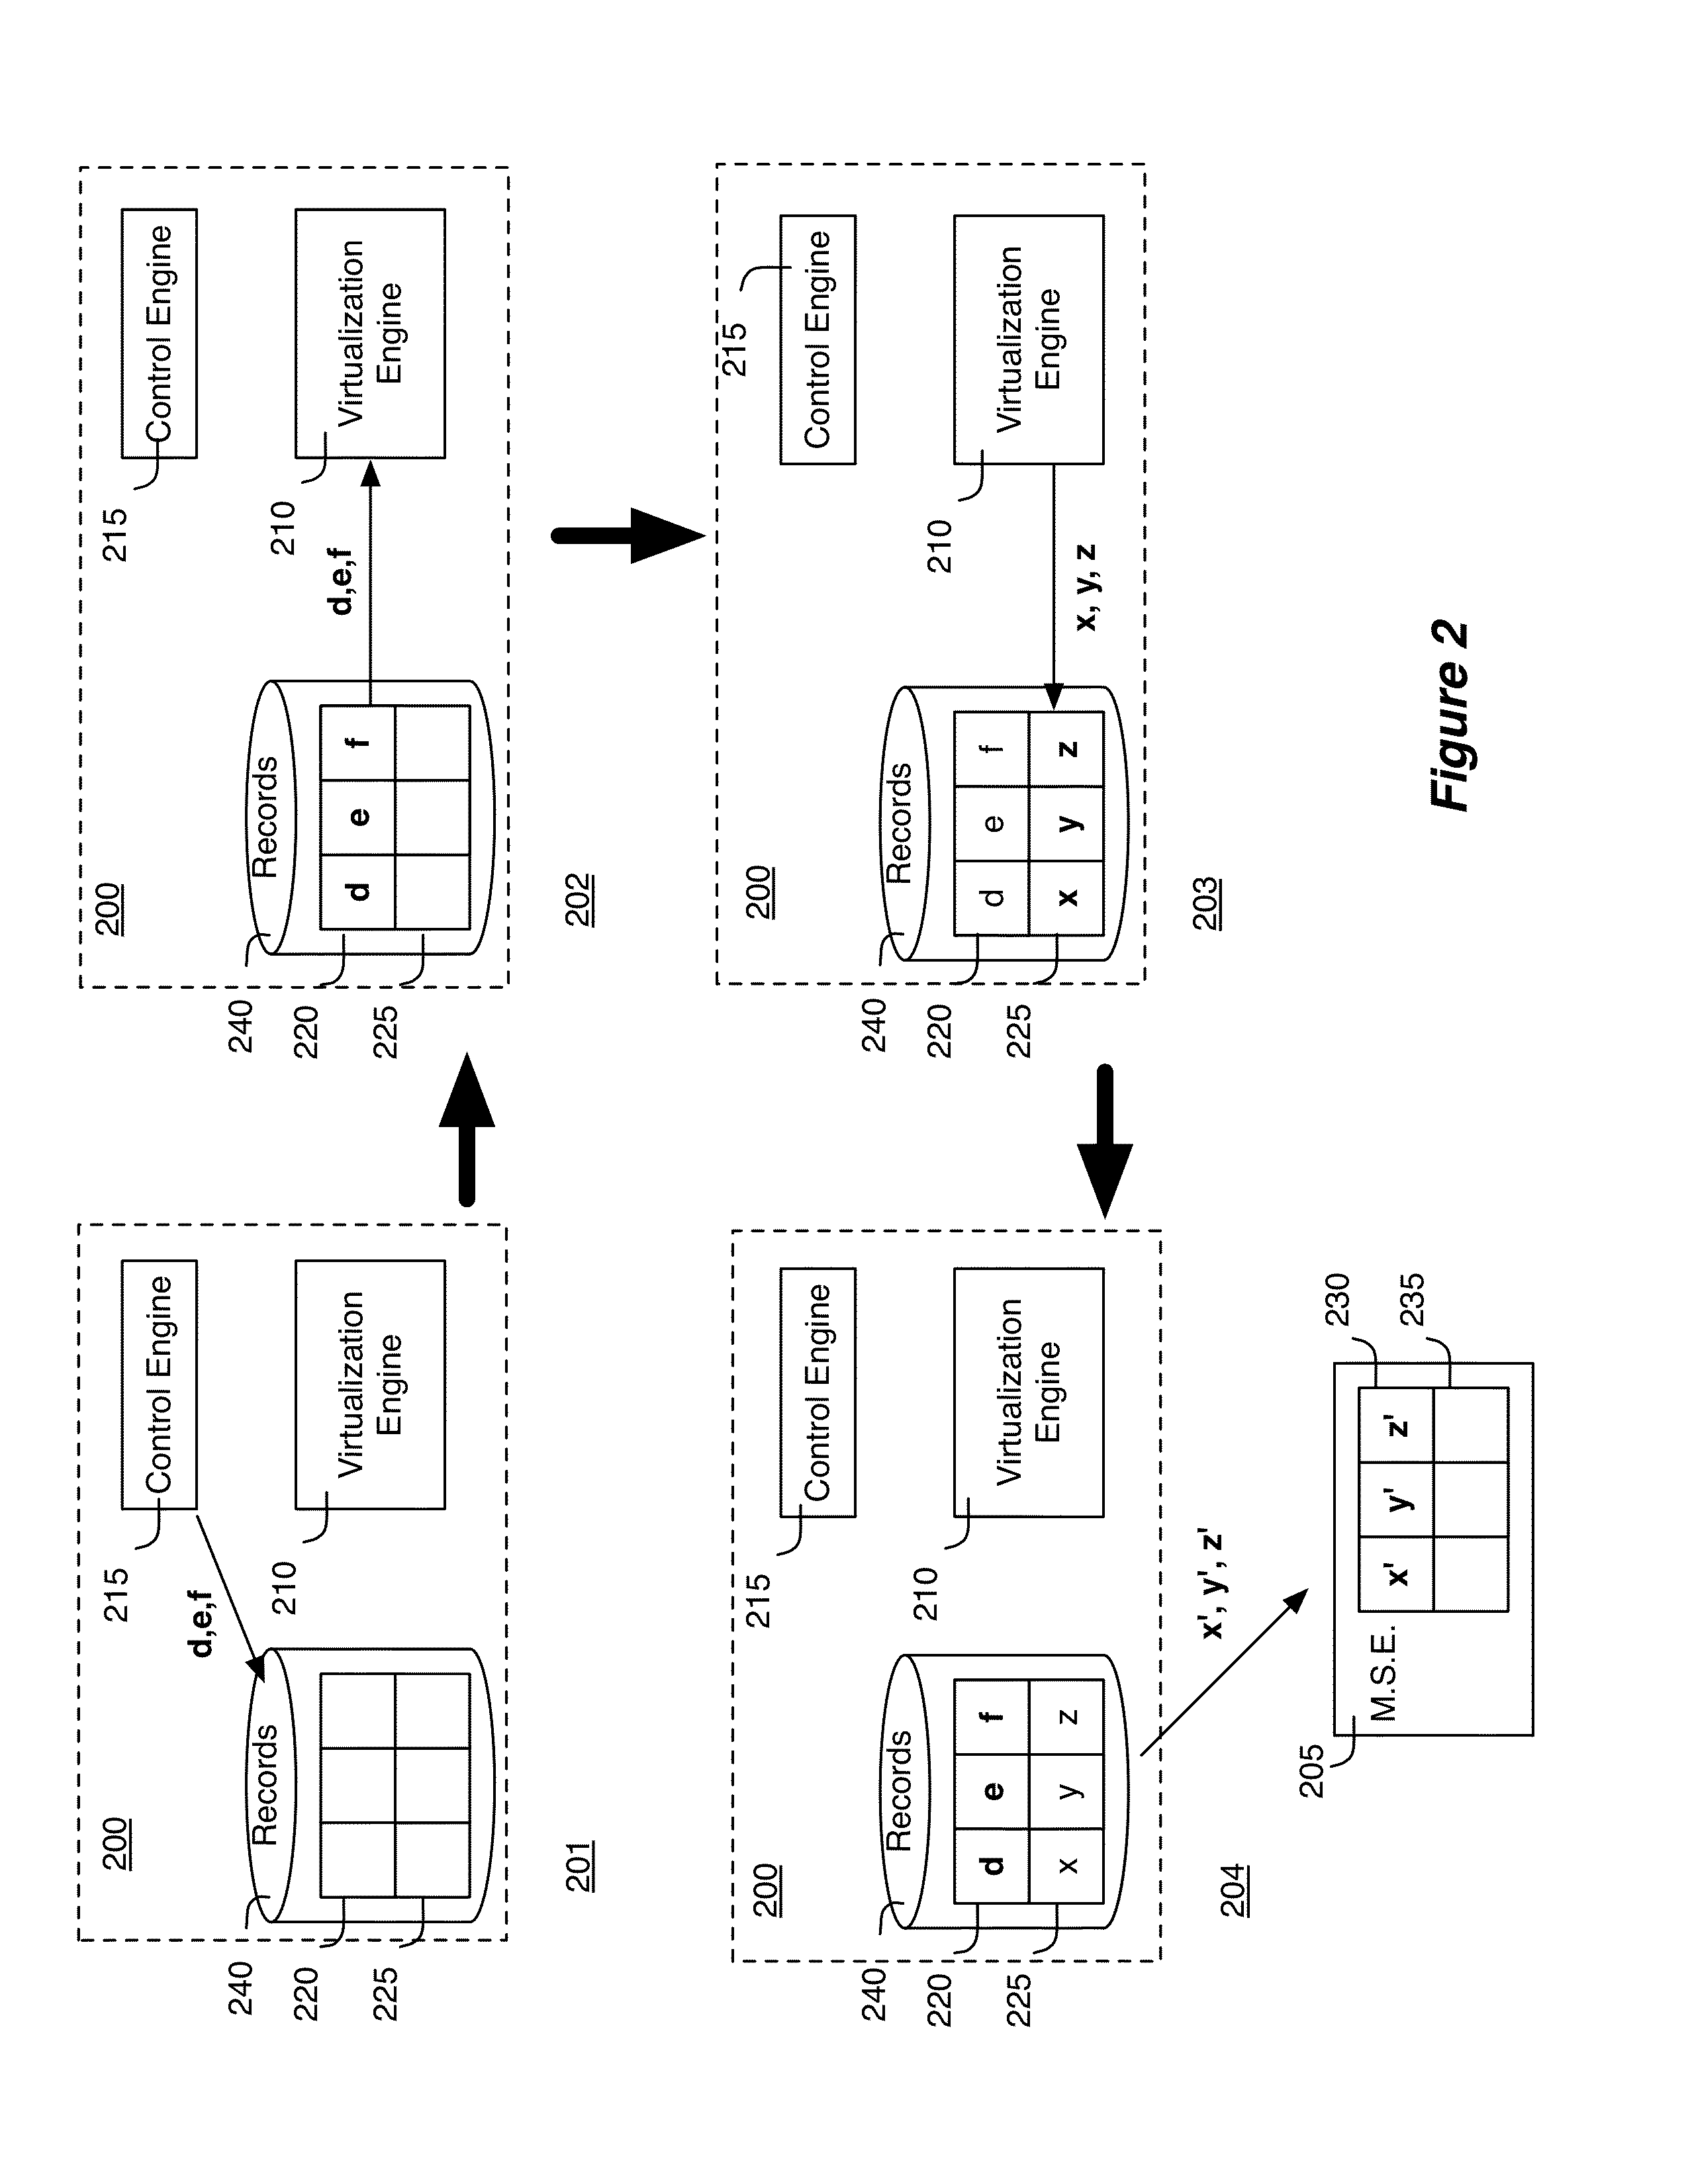 Communication channel for distributed network control system